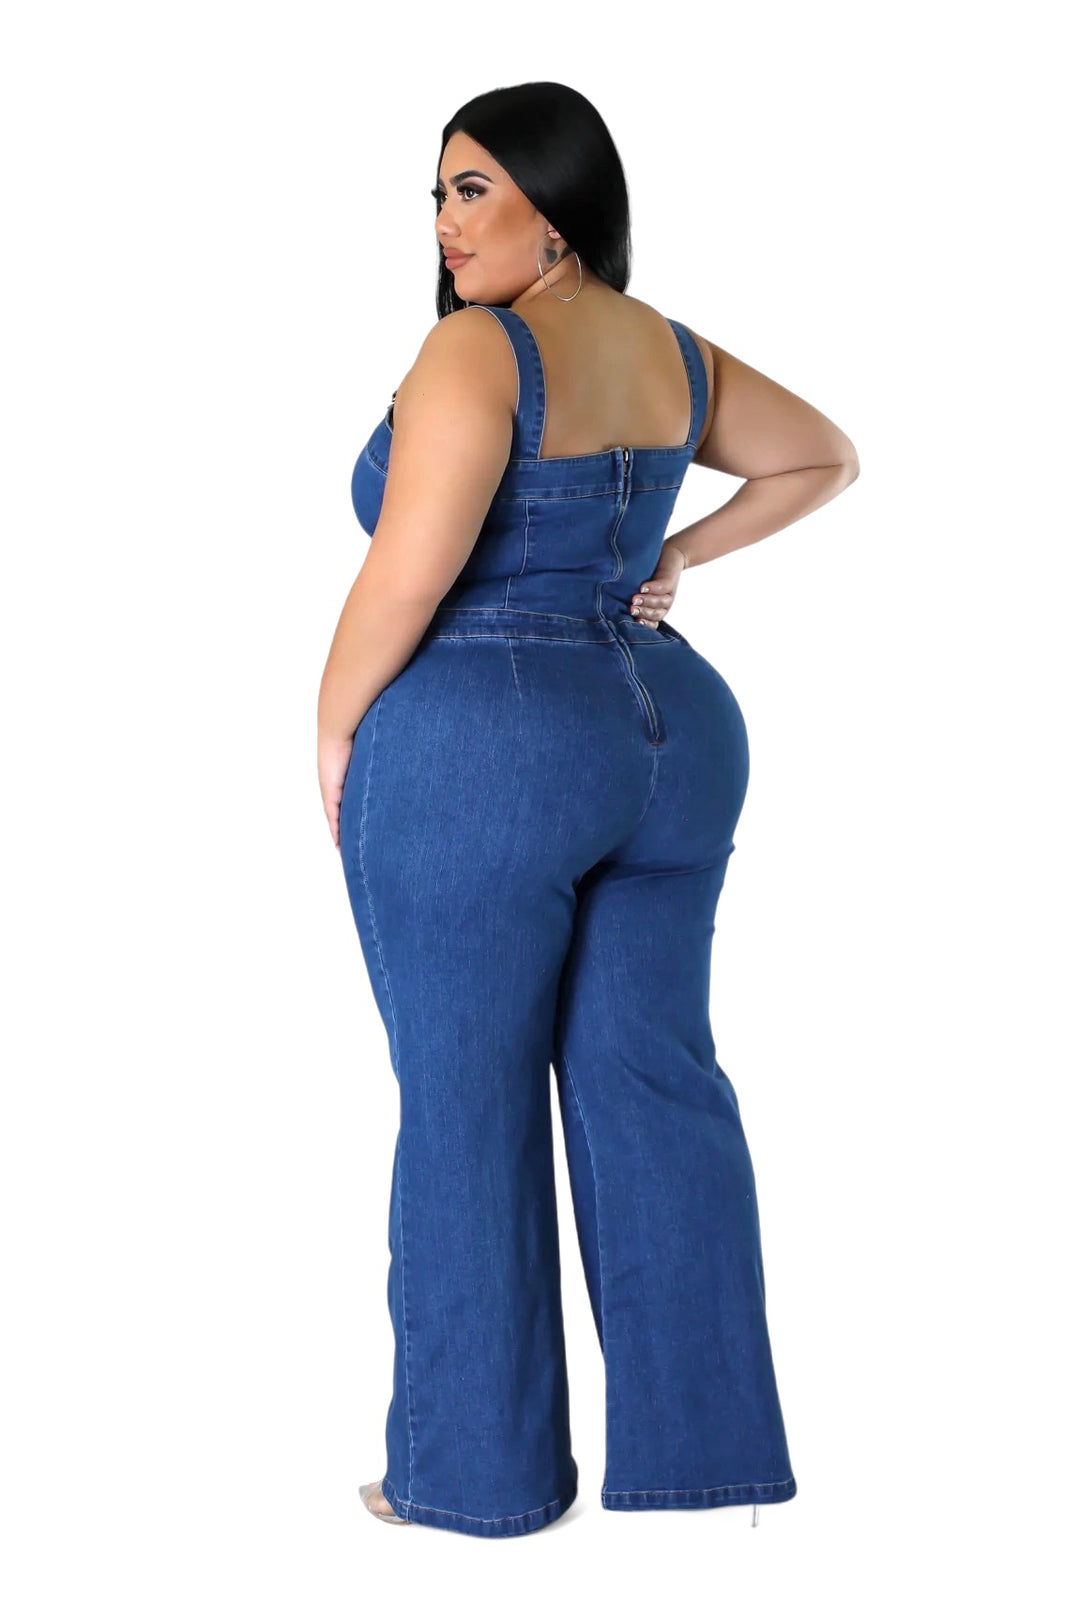 a woman in a denim jumpsuit with her hands on her hips